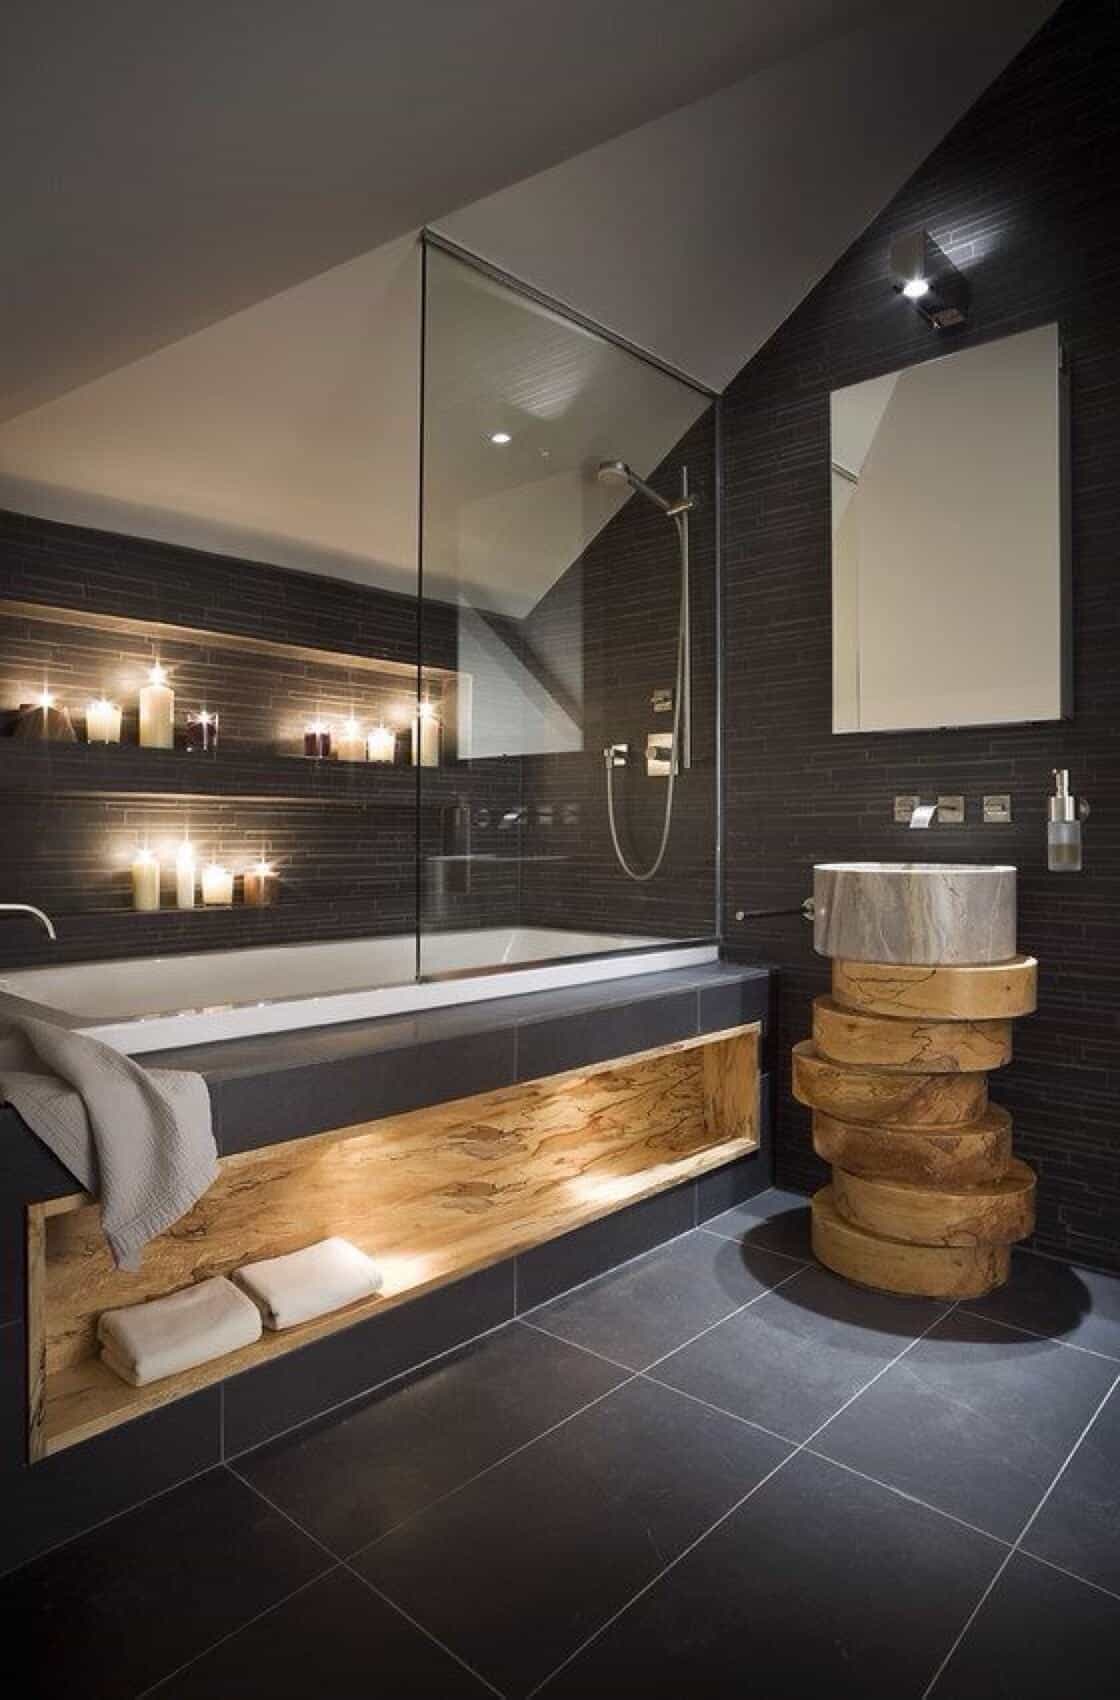  It has to offering a surely score of comfort Rustic Bathroom Ideas